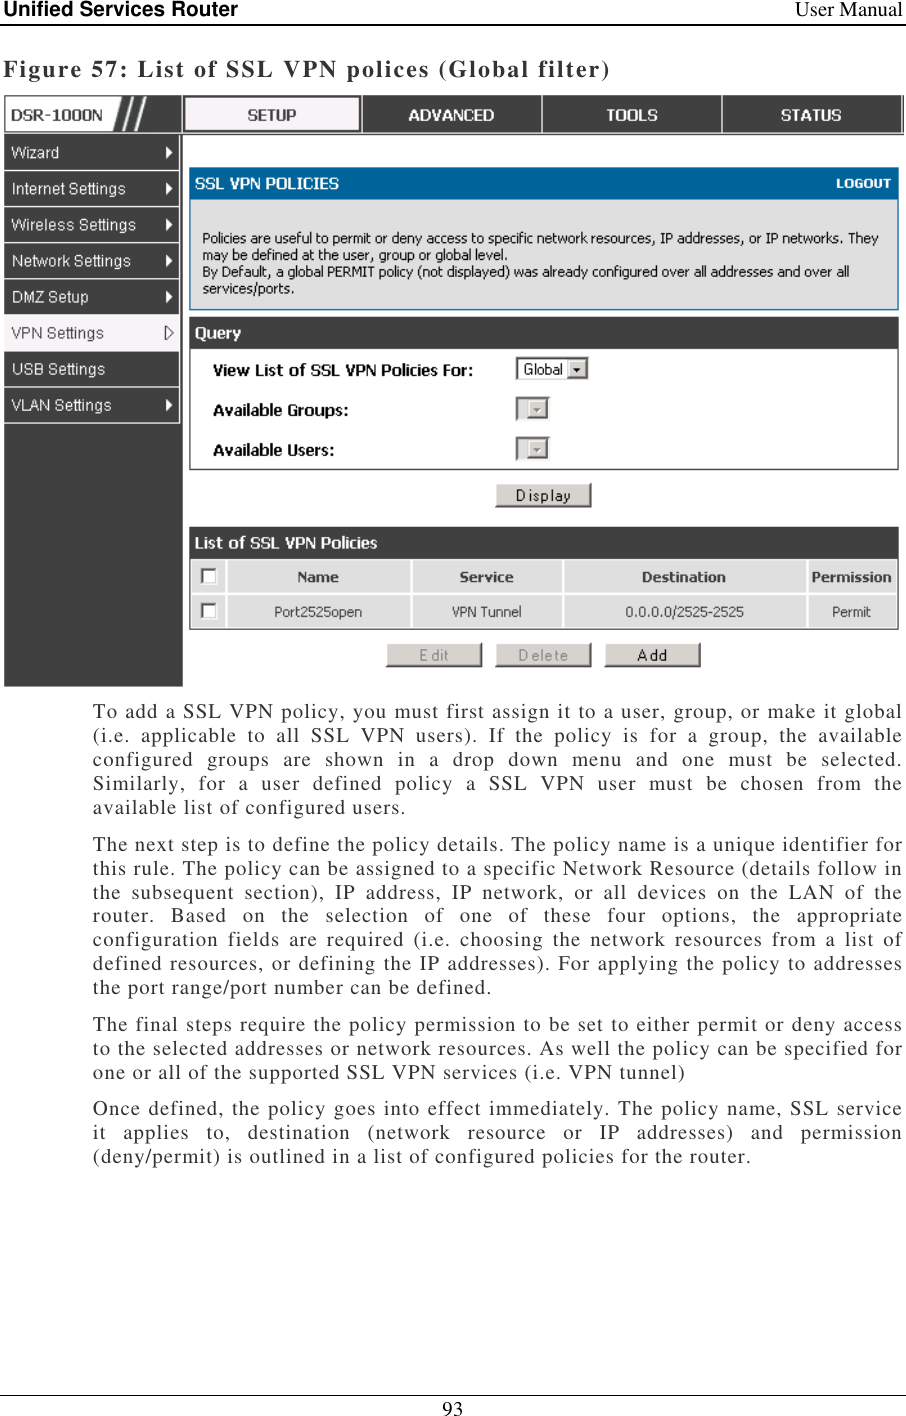 Unified Services Router    User Manual 93  Figure 57: List of SSL VPN polices (Global filter)  To add a SSL VPN policy, you must first assign it to a user, group, or make it global (i.e.  applicable  to  all  SSL  VPN  users).  If  the  policy  is  for  a  group,  the  available configured  groups  are  shown  in  a  drop  down  menu  and  one  must  be  selected. Similarly,  for  a  user  defined  policy  a  SSL  VPN  user  must  be  chosen  from  the available list of configured users.  The next step is to define the policy details. The policy name is a unique identifier for this rule. The policy can be assigned to a specific Network Resource (details follow in the  subsequent  section),  IP  address,  IP  network,  or  all  devices  on  the  LAN  of  the router.  Based  on  the  selection  of  one  of  these  four  options,  the  appropriate configuration  fields  are  required  (i.e.  choosing  the  network  resources  from  a  list  of defined resources, or defining the IP addresses). For applying the policy to addresses the port range/port number can be defined.  The final steps require the policy permission to be set to either permit or deny access to the selected addresses or network resources. As well the policy can be specified for one or all of the supported SSL VPN services (i.e. VPN tunnel) Once defined, the policy goes into effect immediately. The policy name, SSL service it  applies  to,  destination  (network  resource  or  IP  addresses)  and  permission (deny/permit) is outlined in a list of configured policies for the router.  